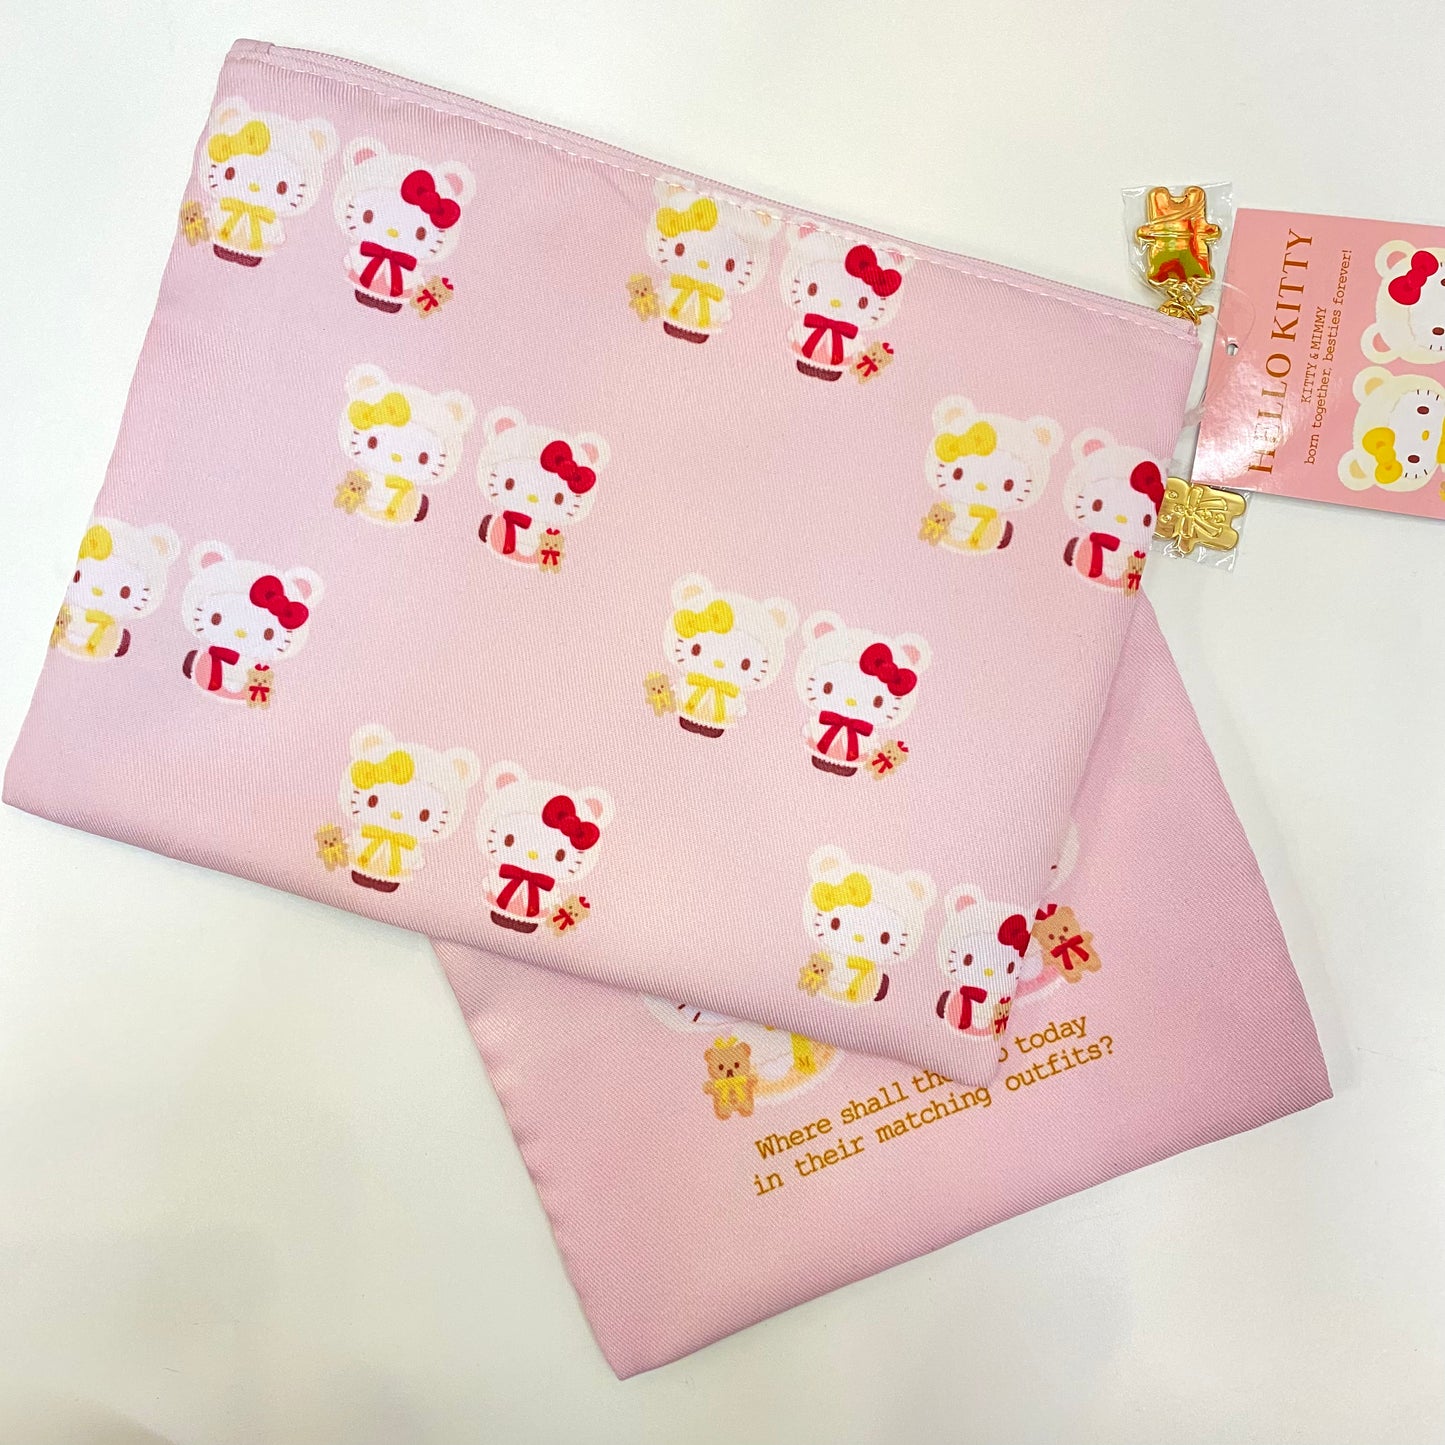 Hello Kitty & Mimmy CAPE KT 2pc Flat Pouch